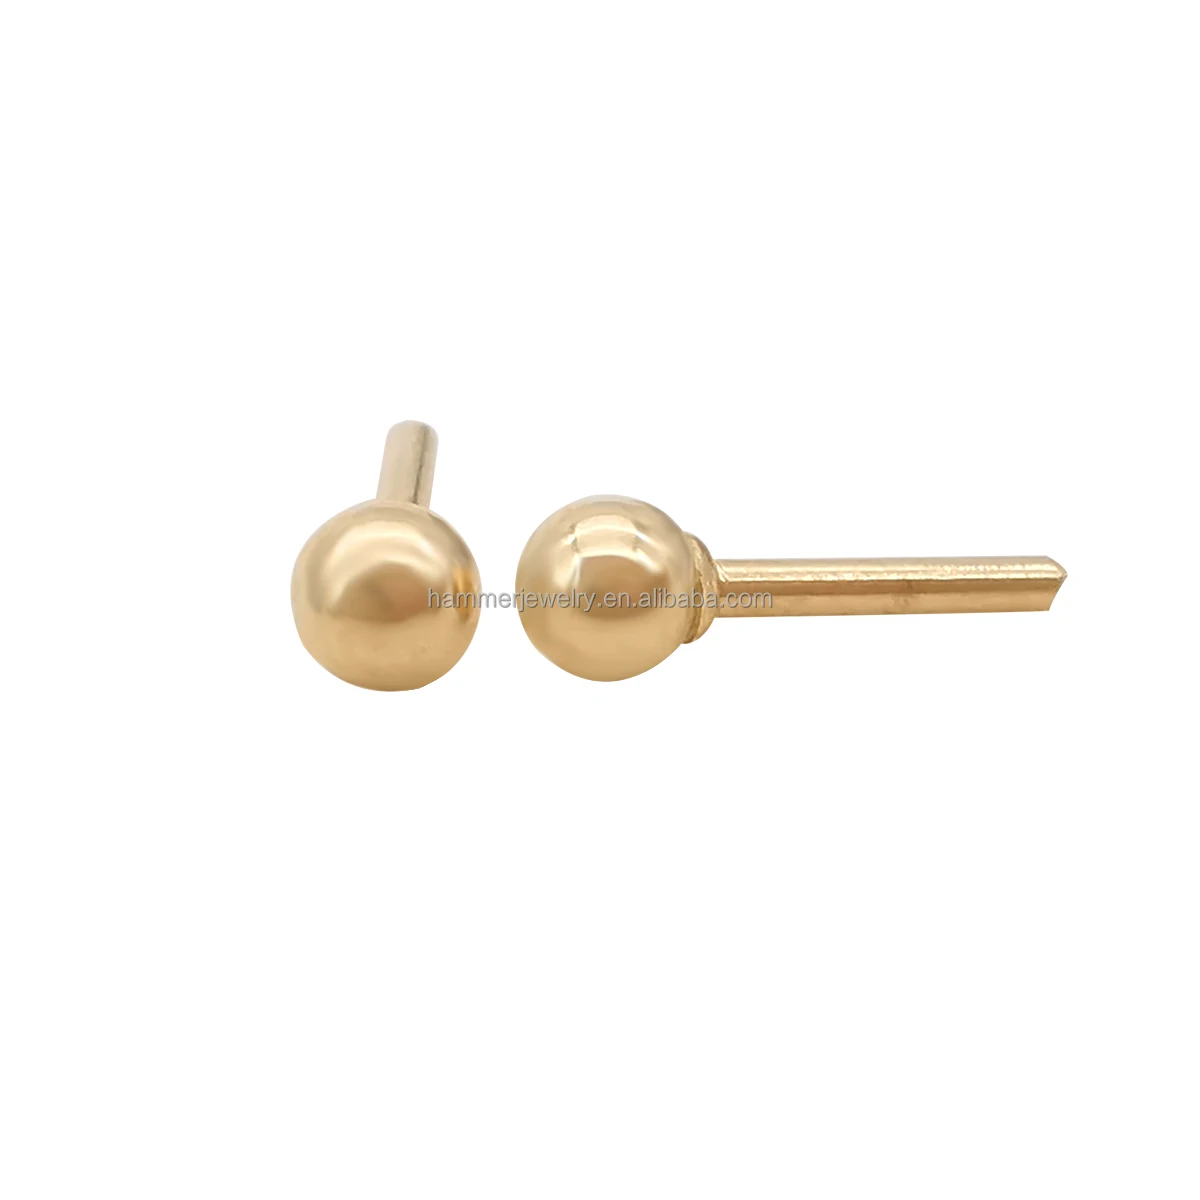 

Soild Gold 9k 14k 18k Gold Earring Post Real Gold Screw Ball Earring Back With Post Jewelry Finding